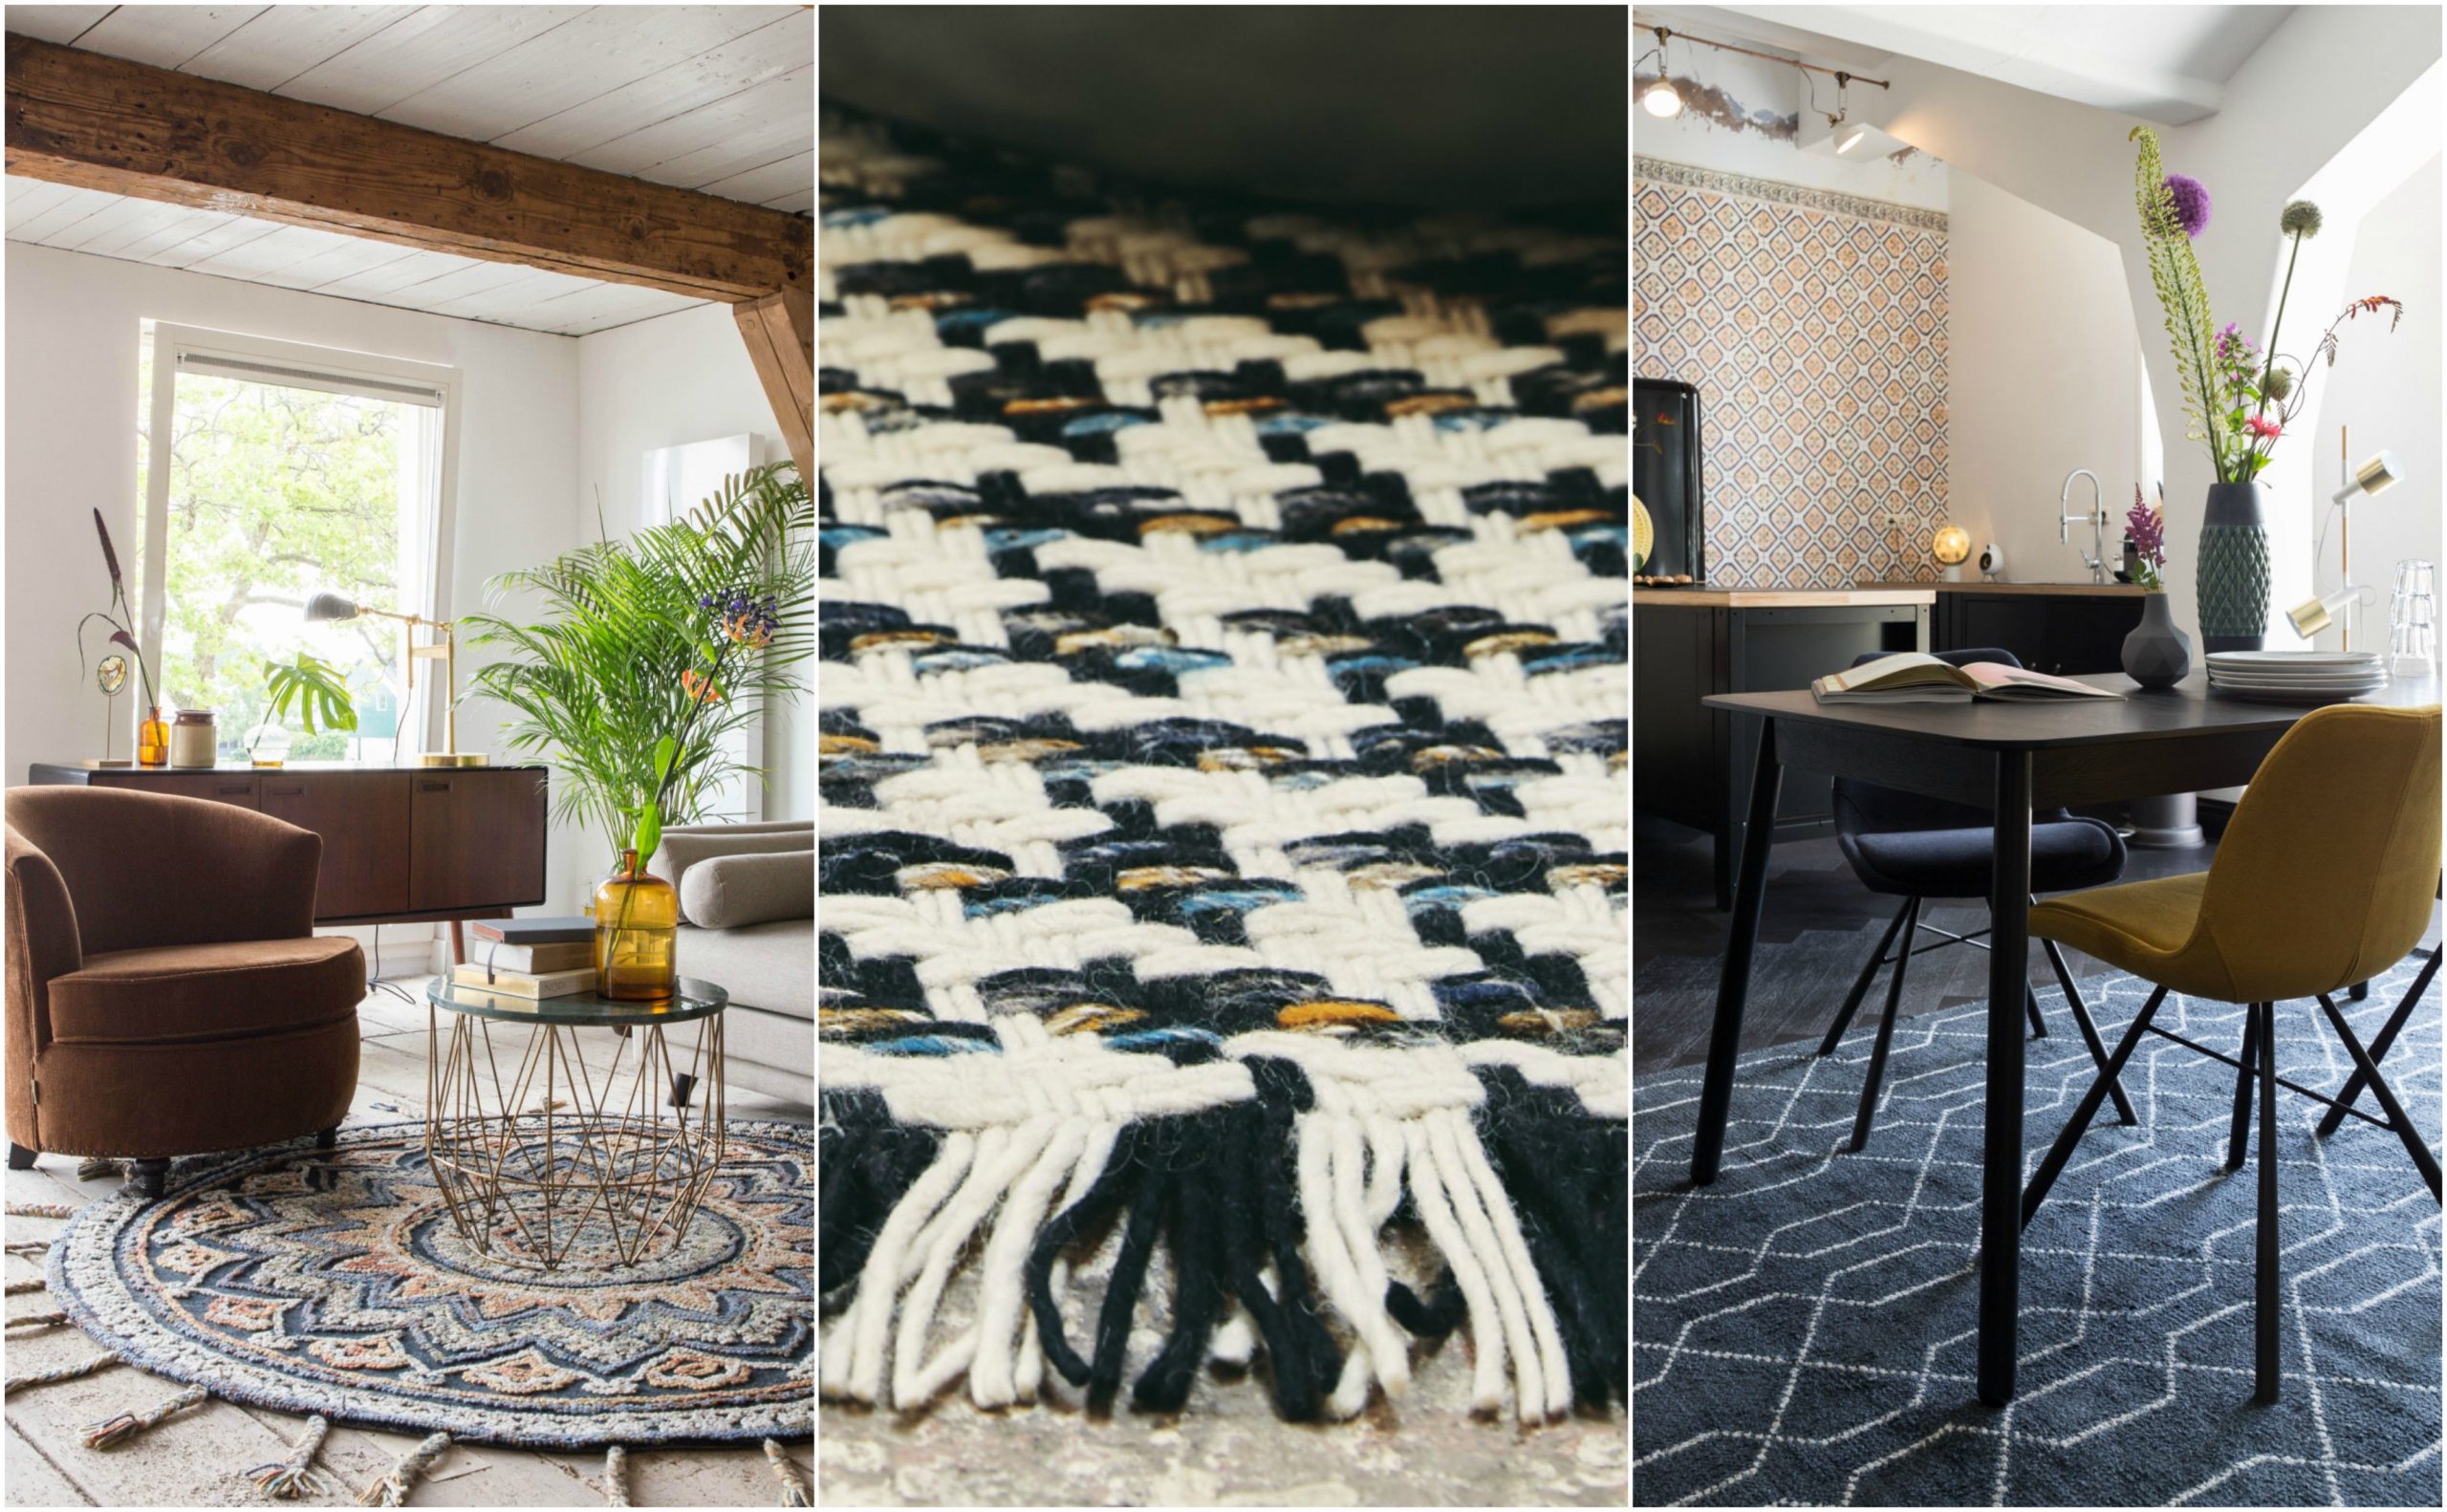 How to choose the branded rugs for your home?